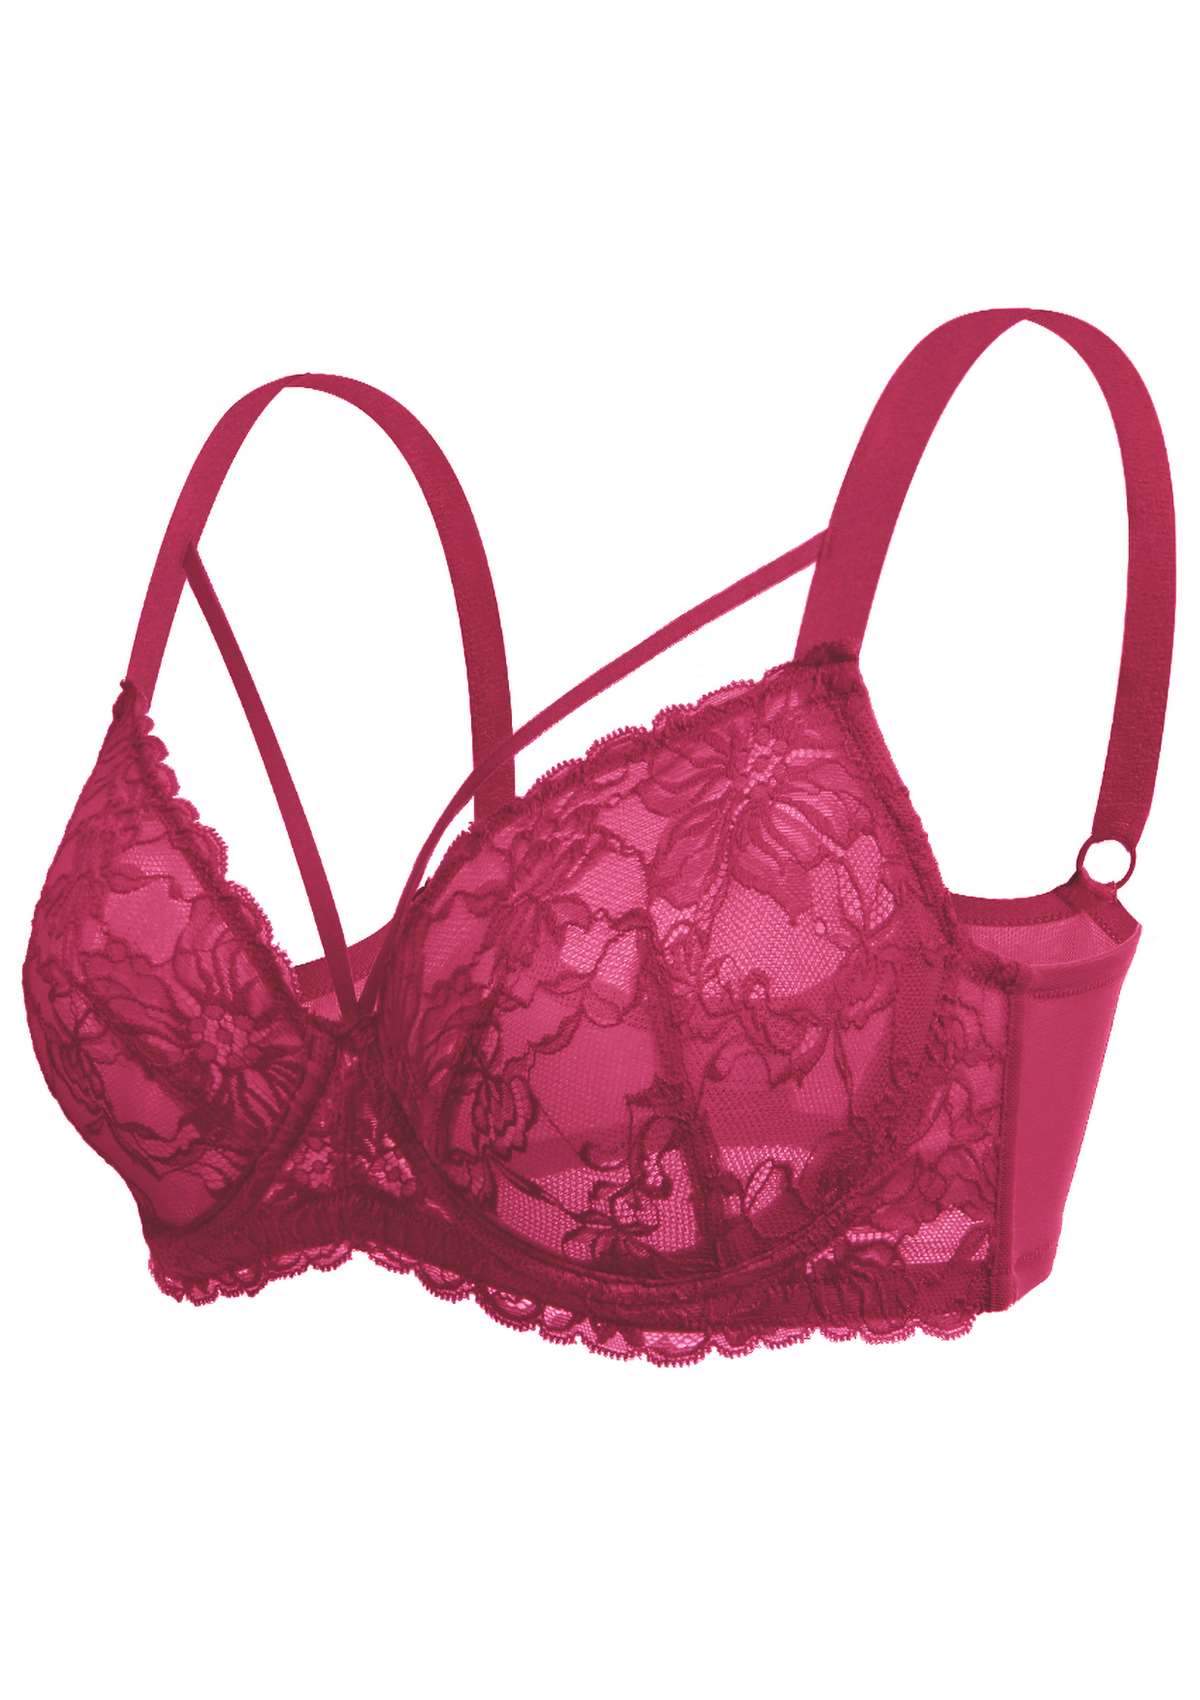 HSIA Pretty In Petals Sexy Lace Bra: Full Coverage Back Smoothing Bra - Copper Red / 36 / C